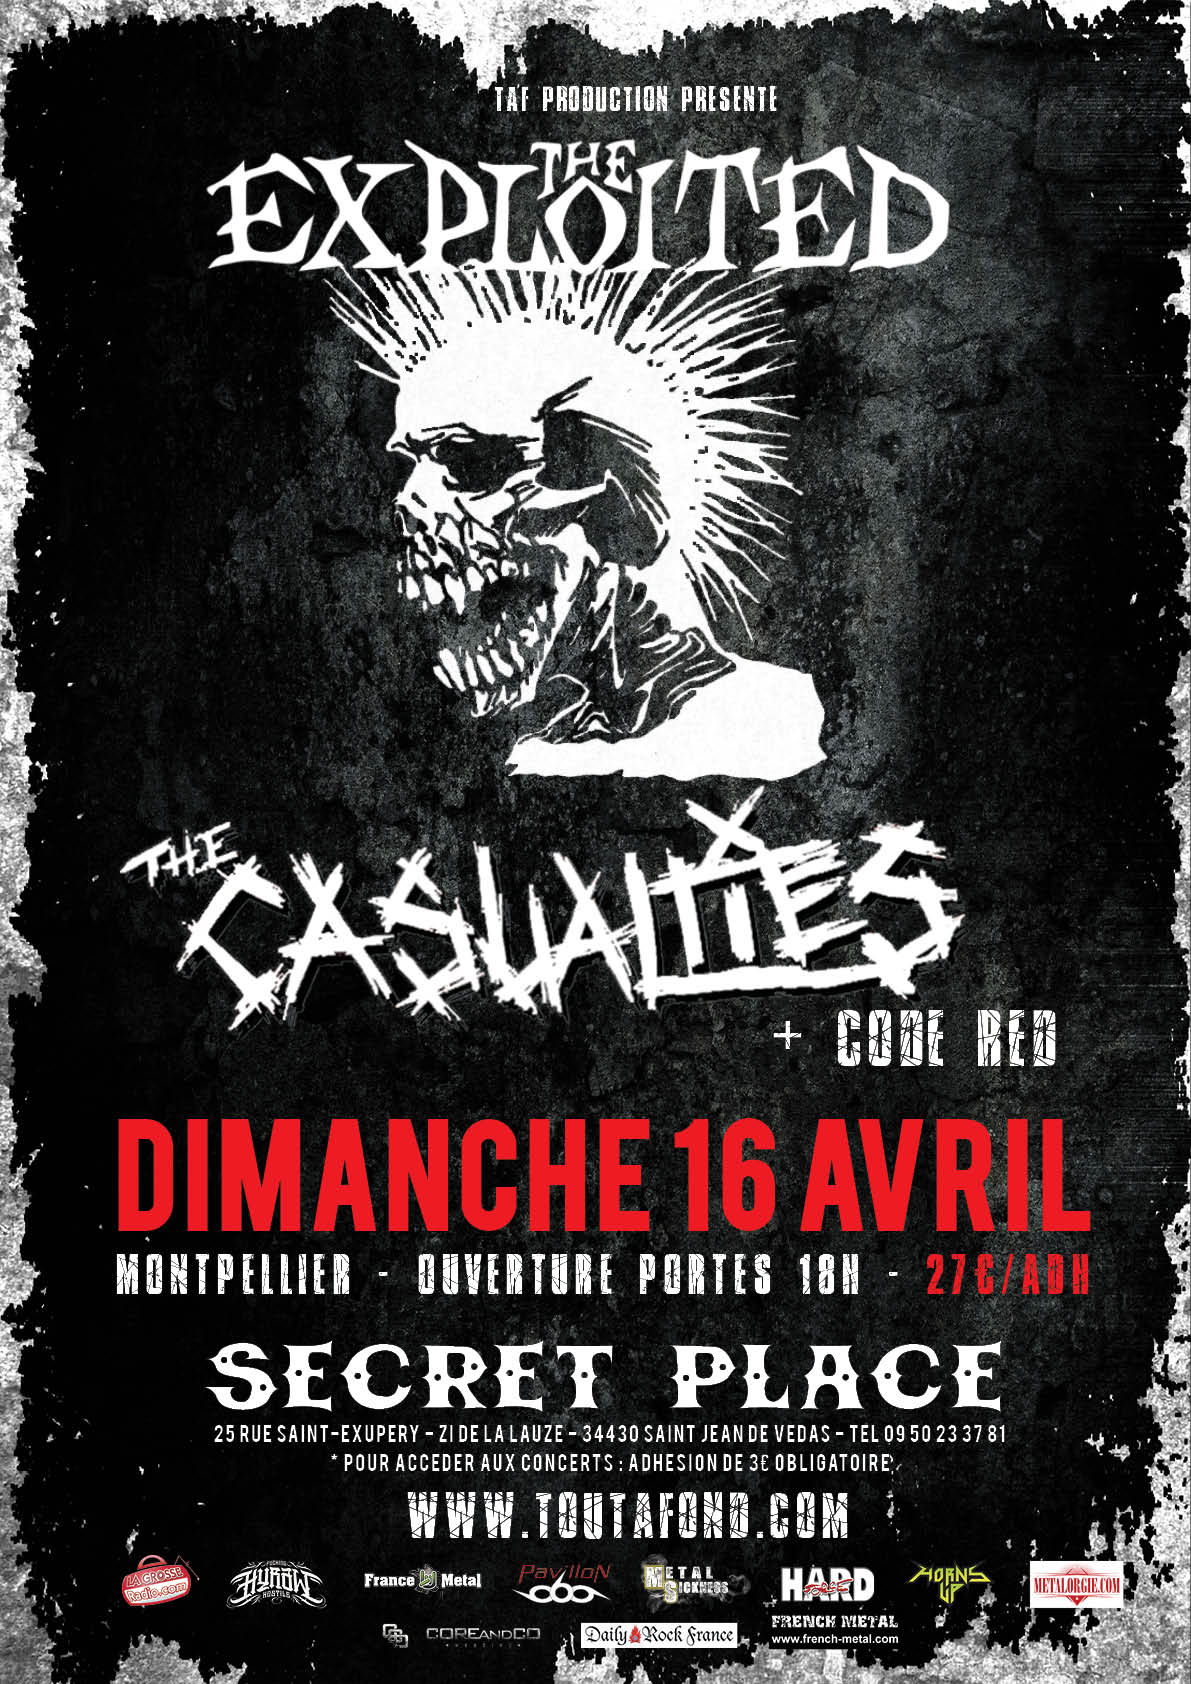 THE EXPLOITED + THE CASUALTIES + CODE RED